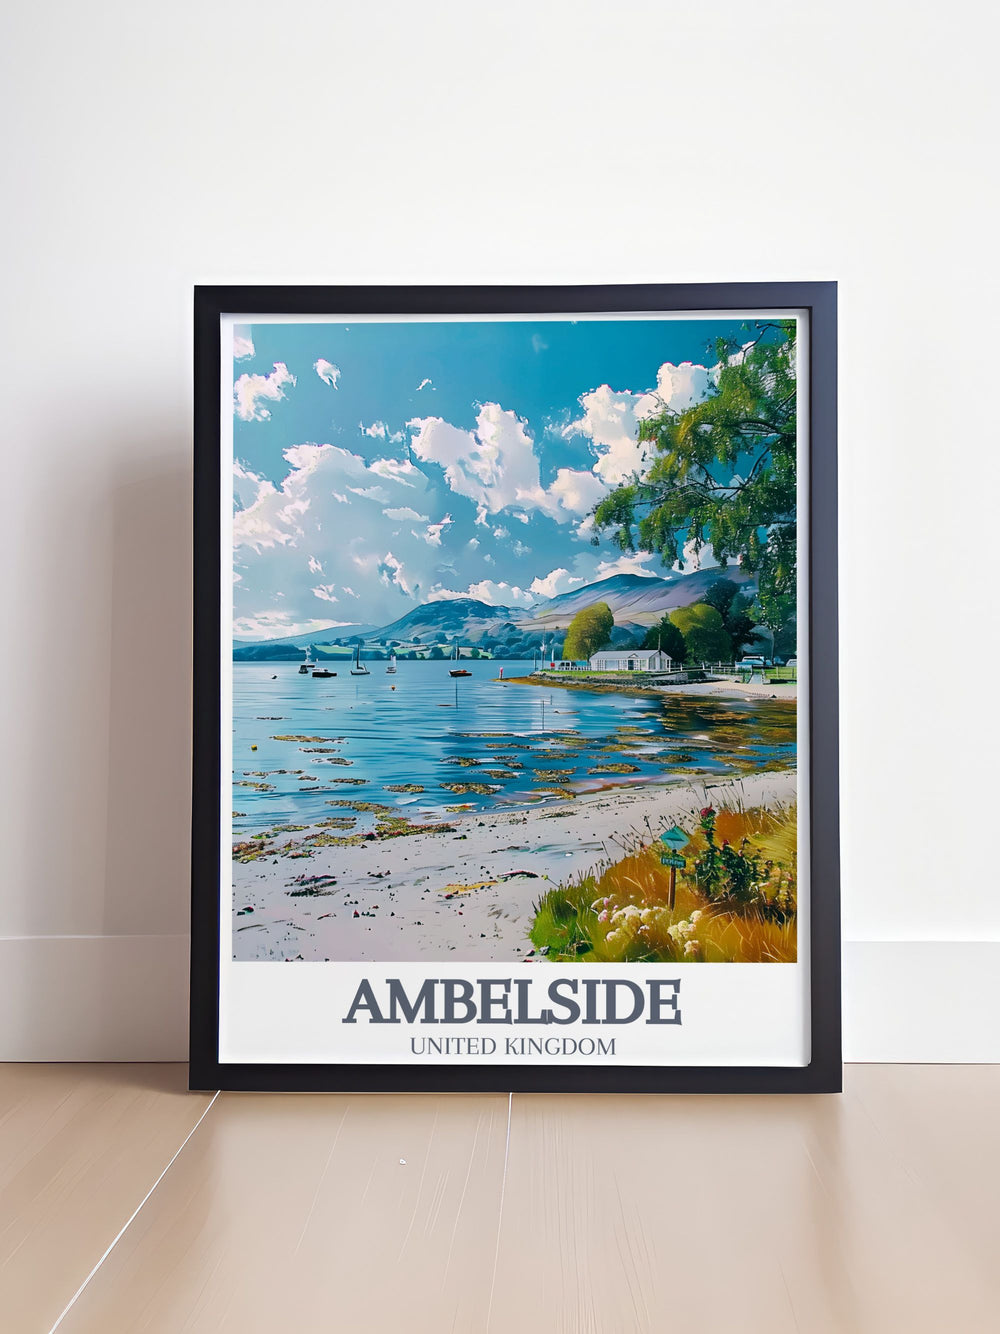 Beautiful Ambleside art print capturing the lush greenery of Borrans Park with its scenic views and tranquil ambiance, perfect for home decor.